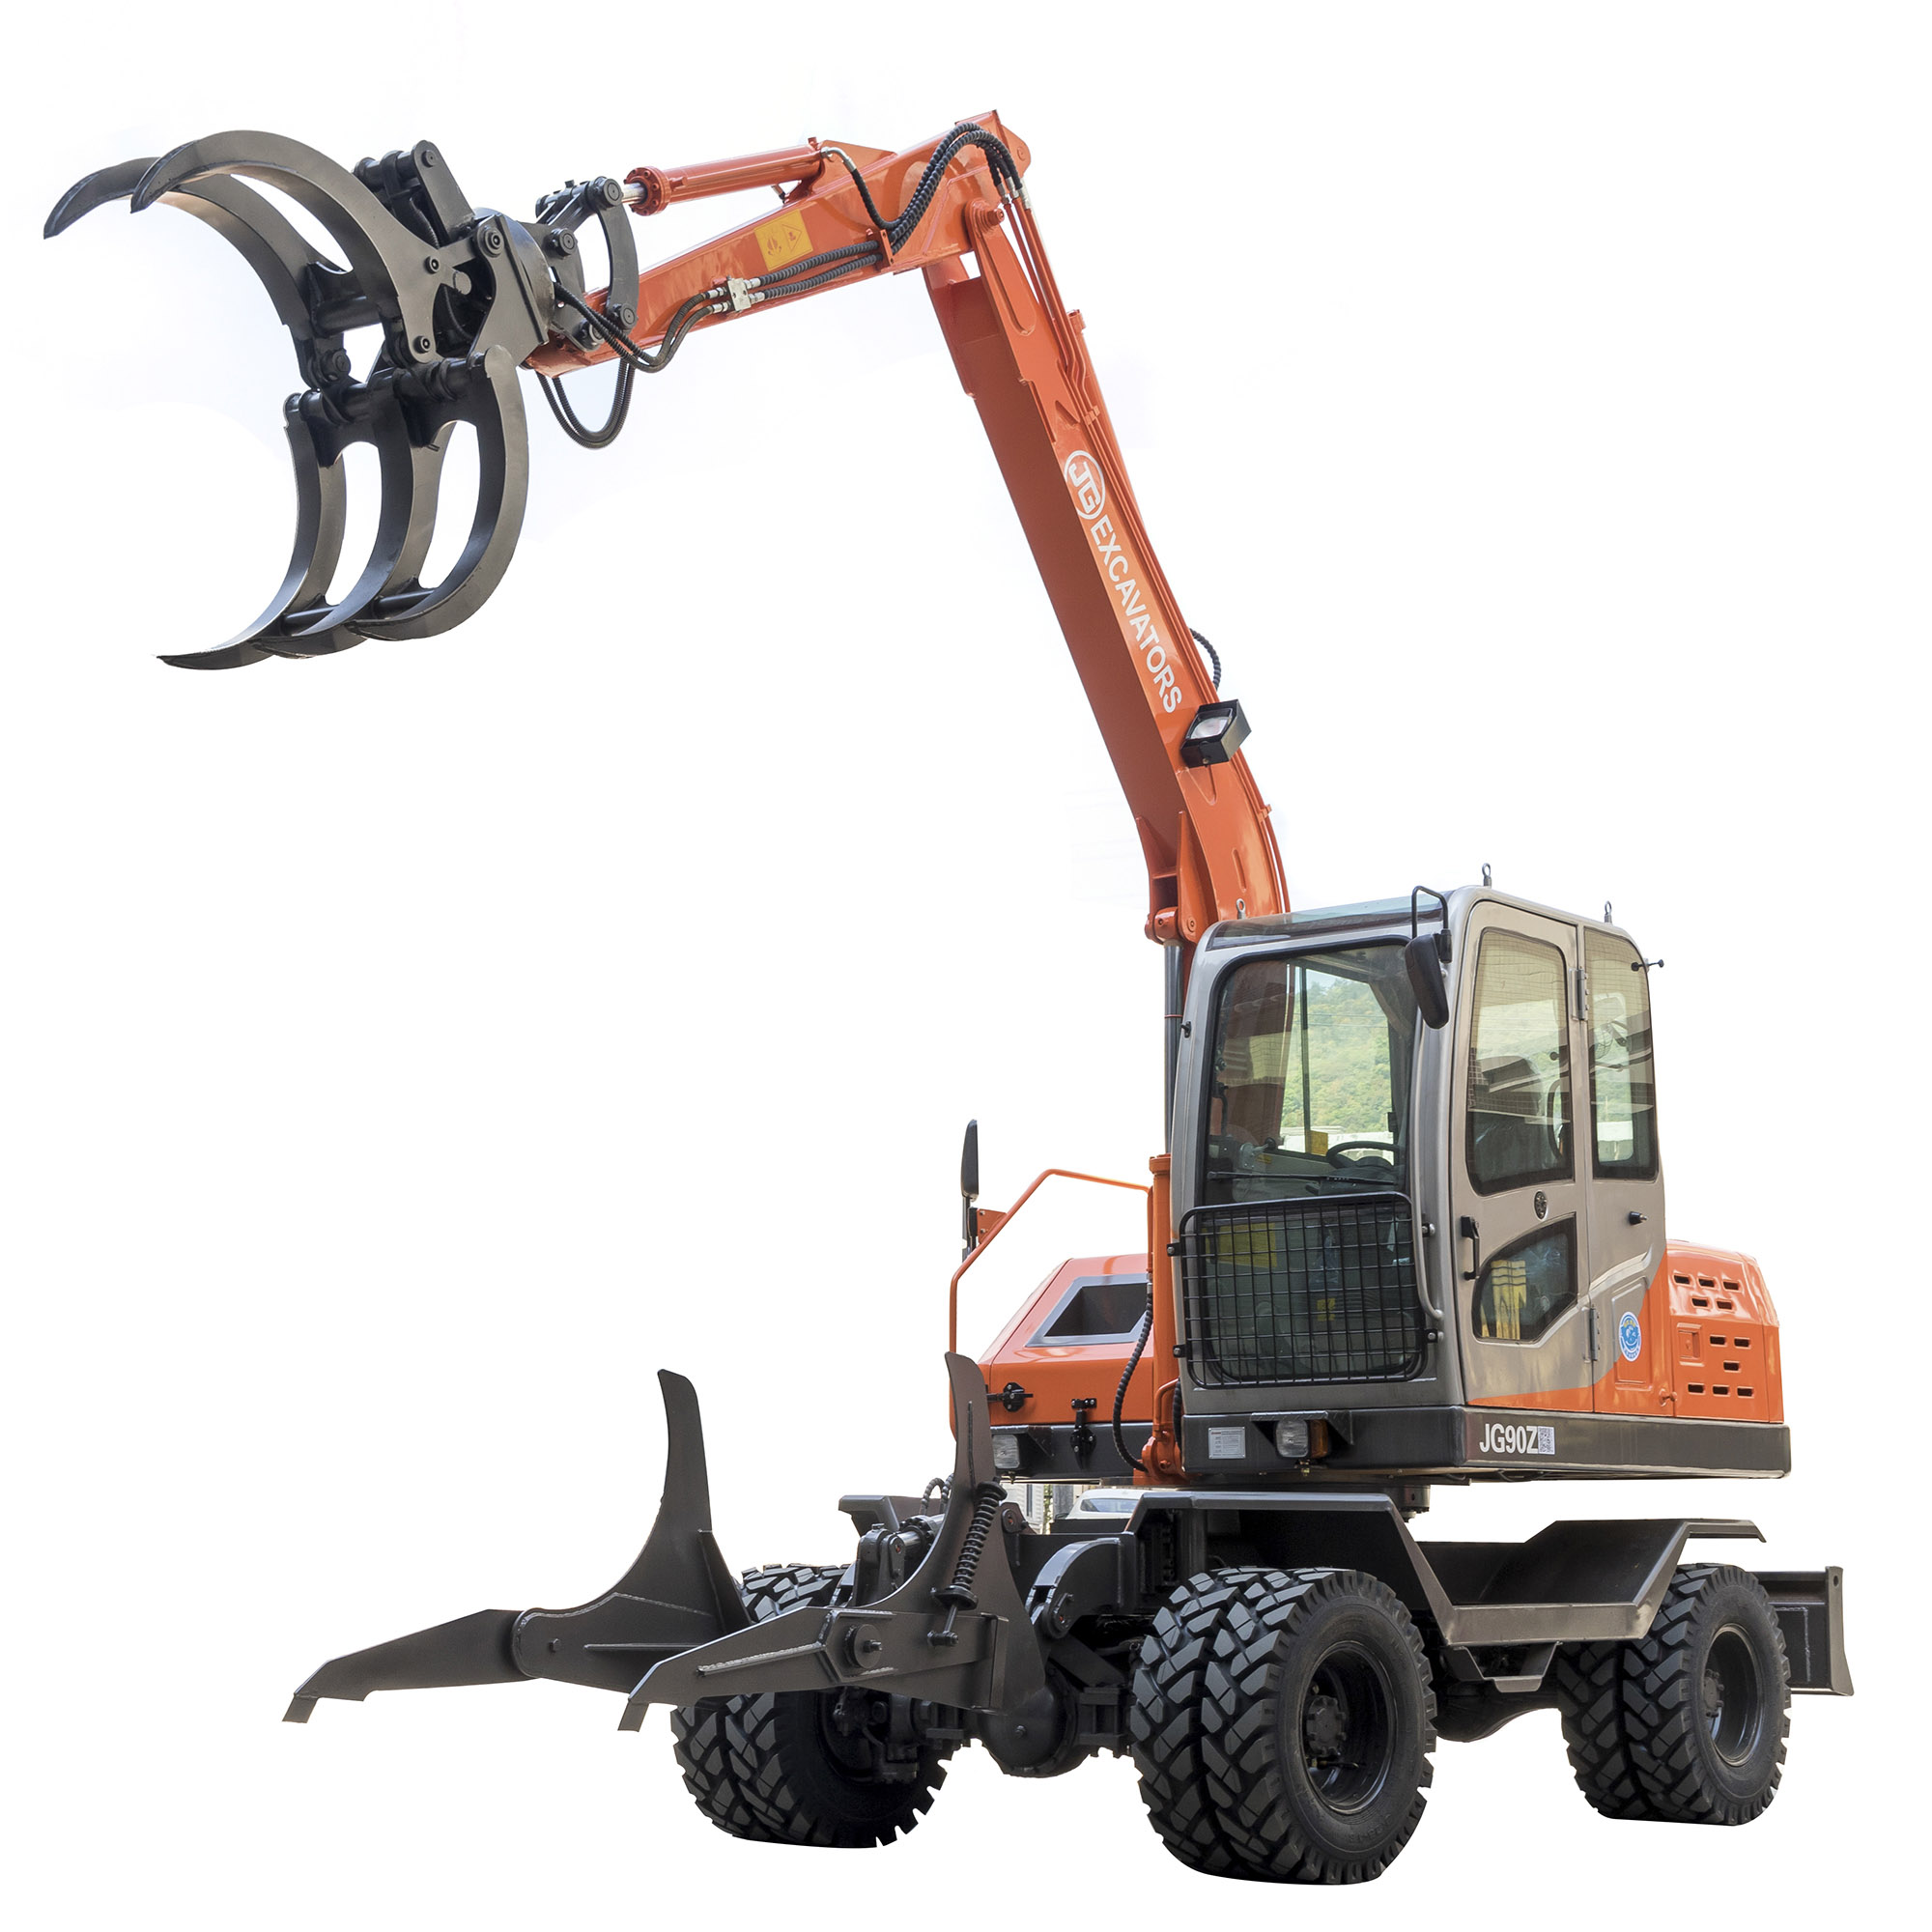 Excavator With Grapple Saw For Sale